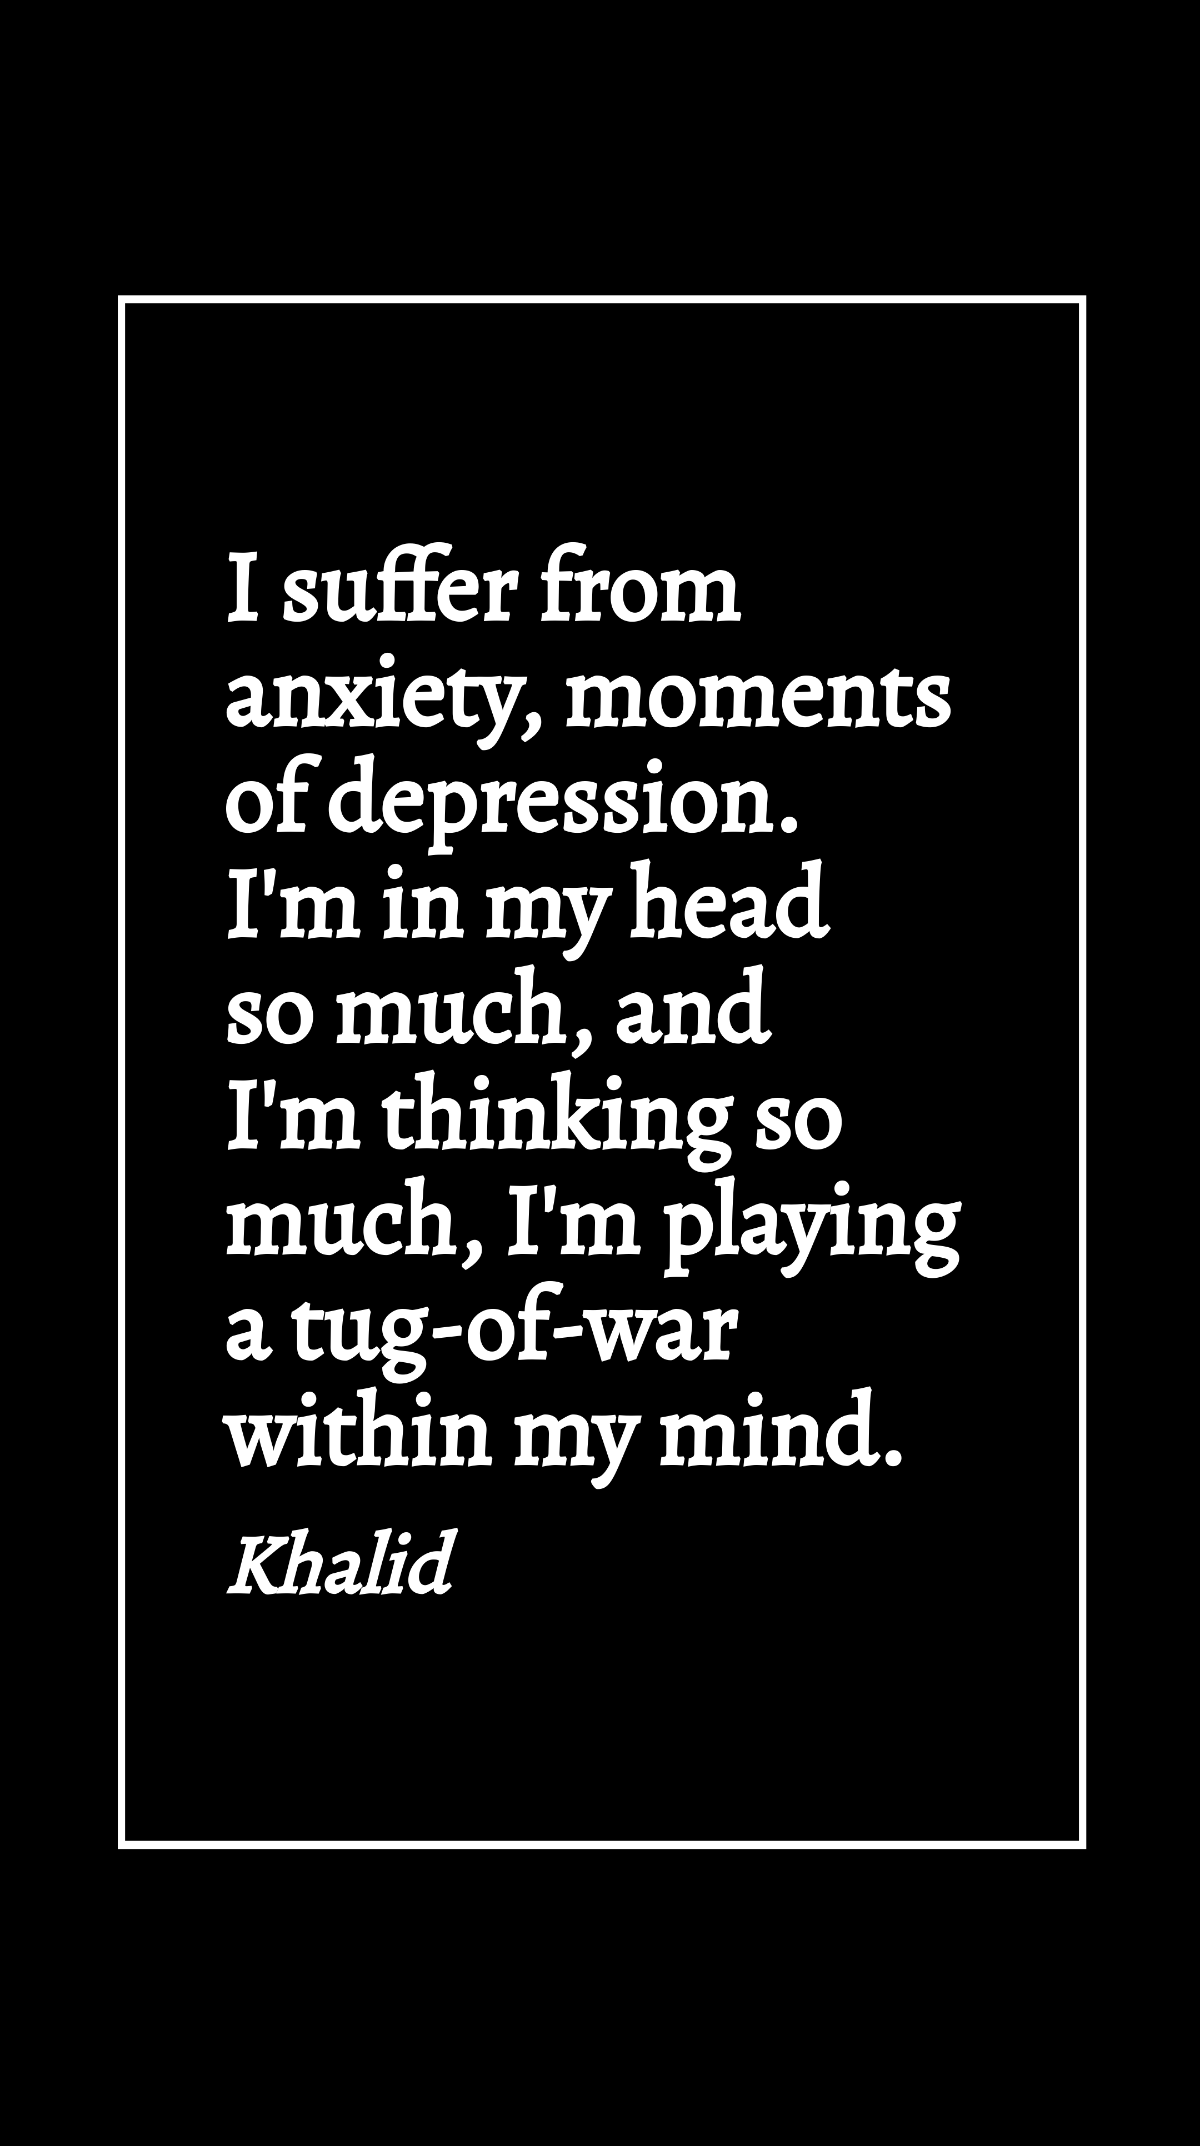 Free Khalid - I suffer from anxiety, moments of depression. I'm in my head so much, and I'm thinking so much, I'm playing a tug-of-war within my mind. Template